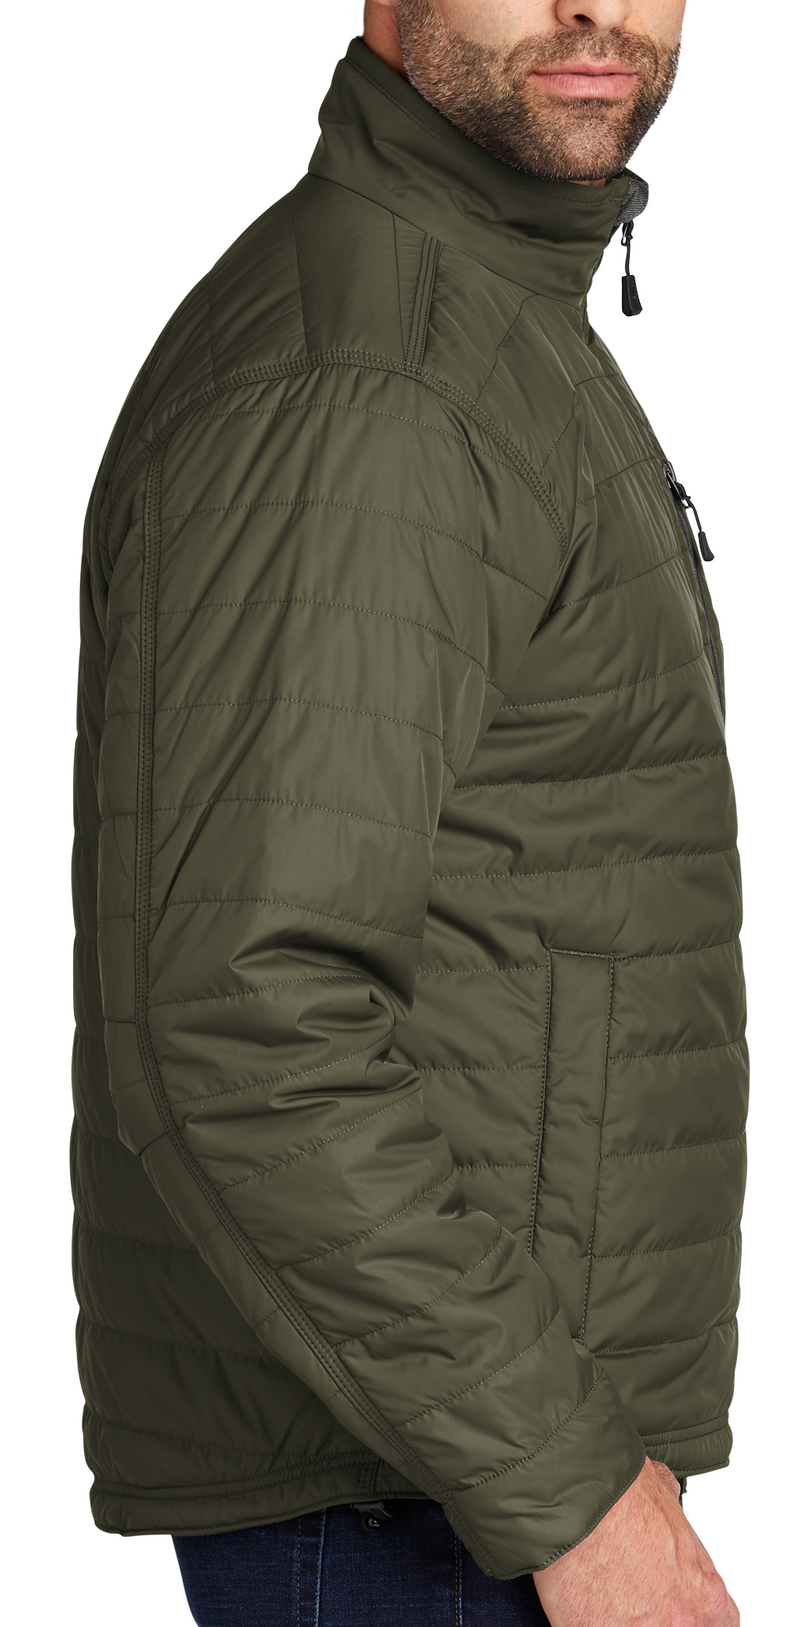 Carhartt [CT102208] Gilliam Jacket. Buy More and Save.